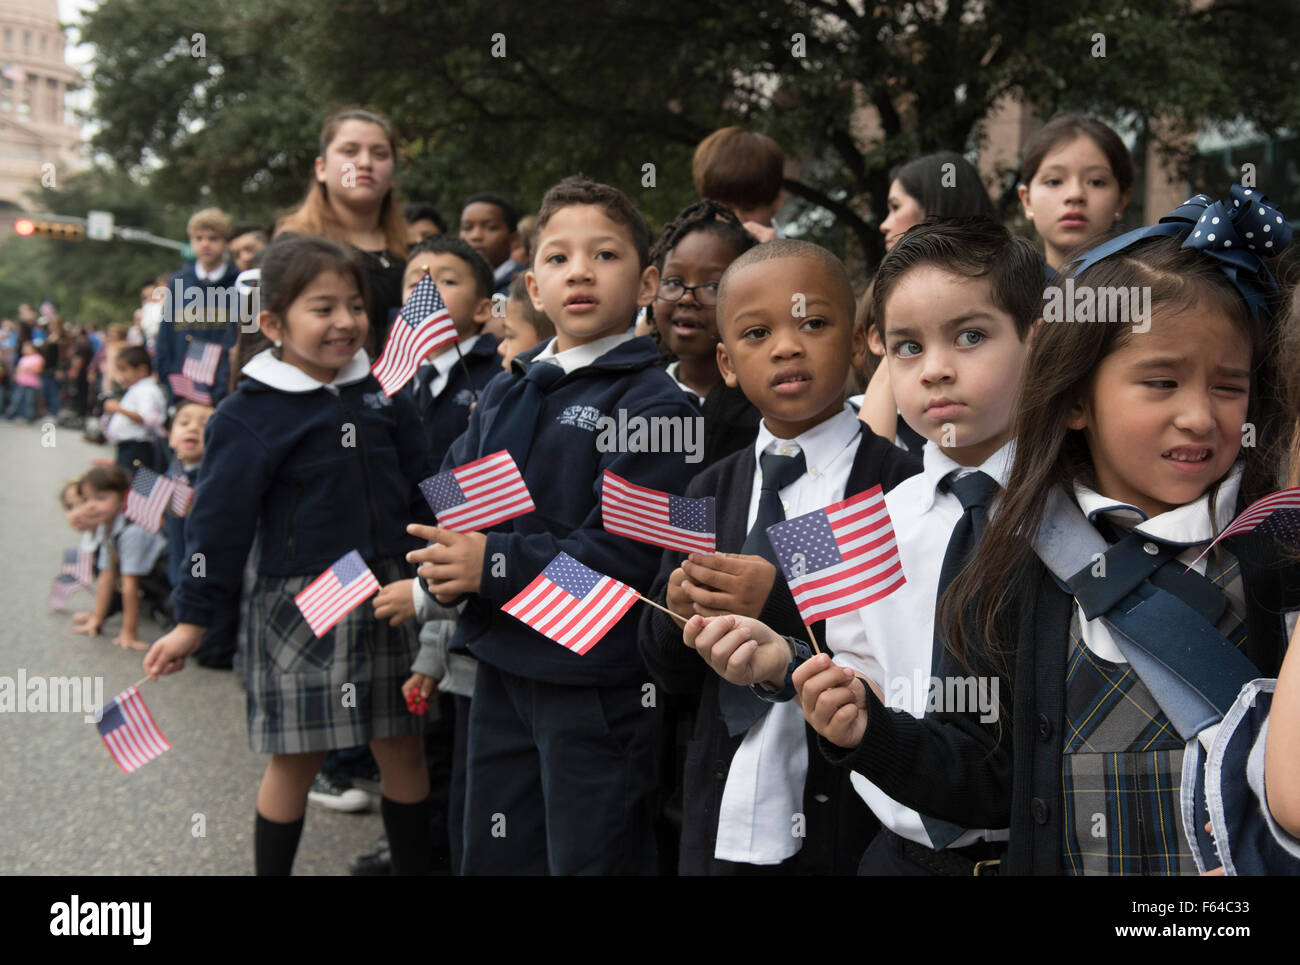 Austin, Texas USA November 11, 2015: Catholic schoolchildren from Saint Mary's in Austin cheer during the Veteran's Day parade up Congress Avenue and ceremony at the Texas Capitol. Several thousand Texans lined Congress Avenue to witness military heroes, marching bands and floats in the annual parade. Credit:  Bob Daemmrich/Alamy Live News Stock Photo